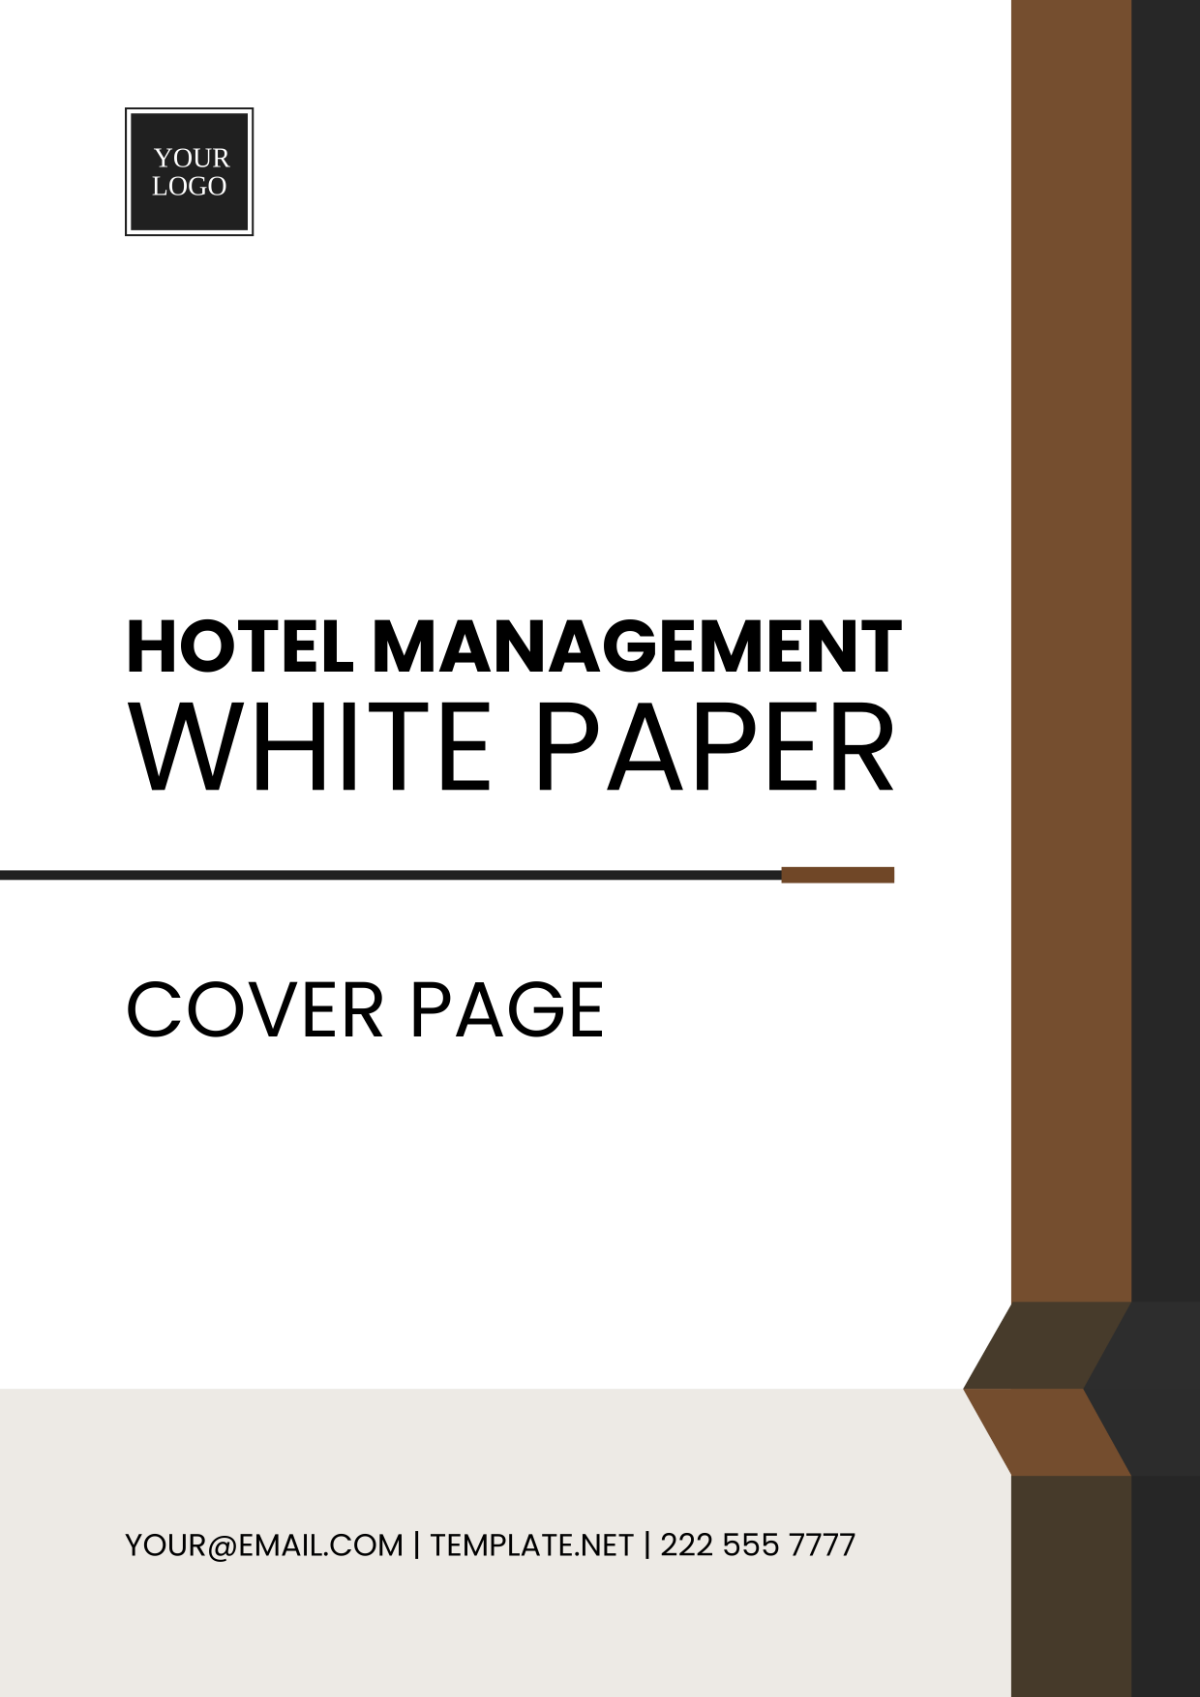 Hotel Management White Paper Cover Page Template